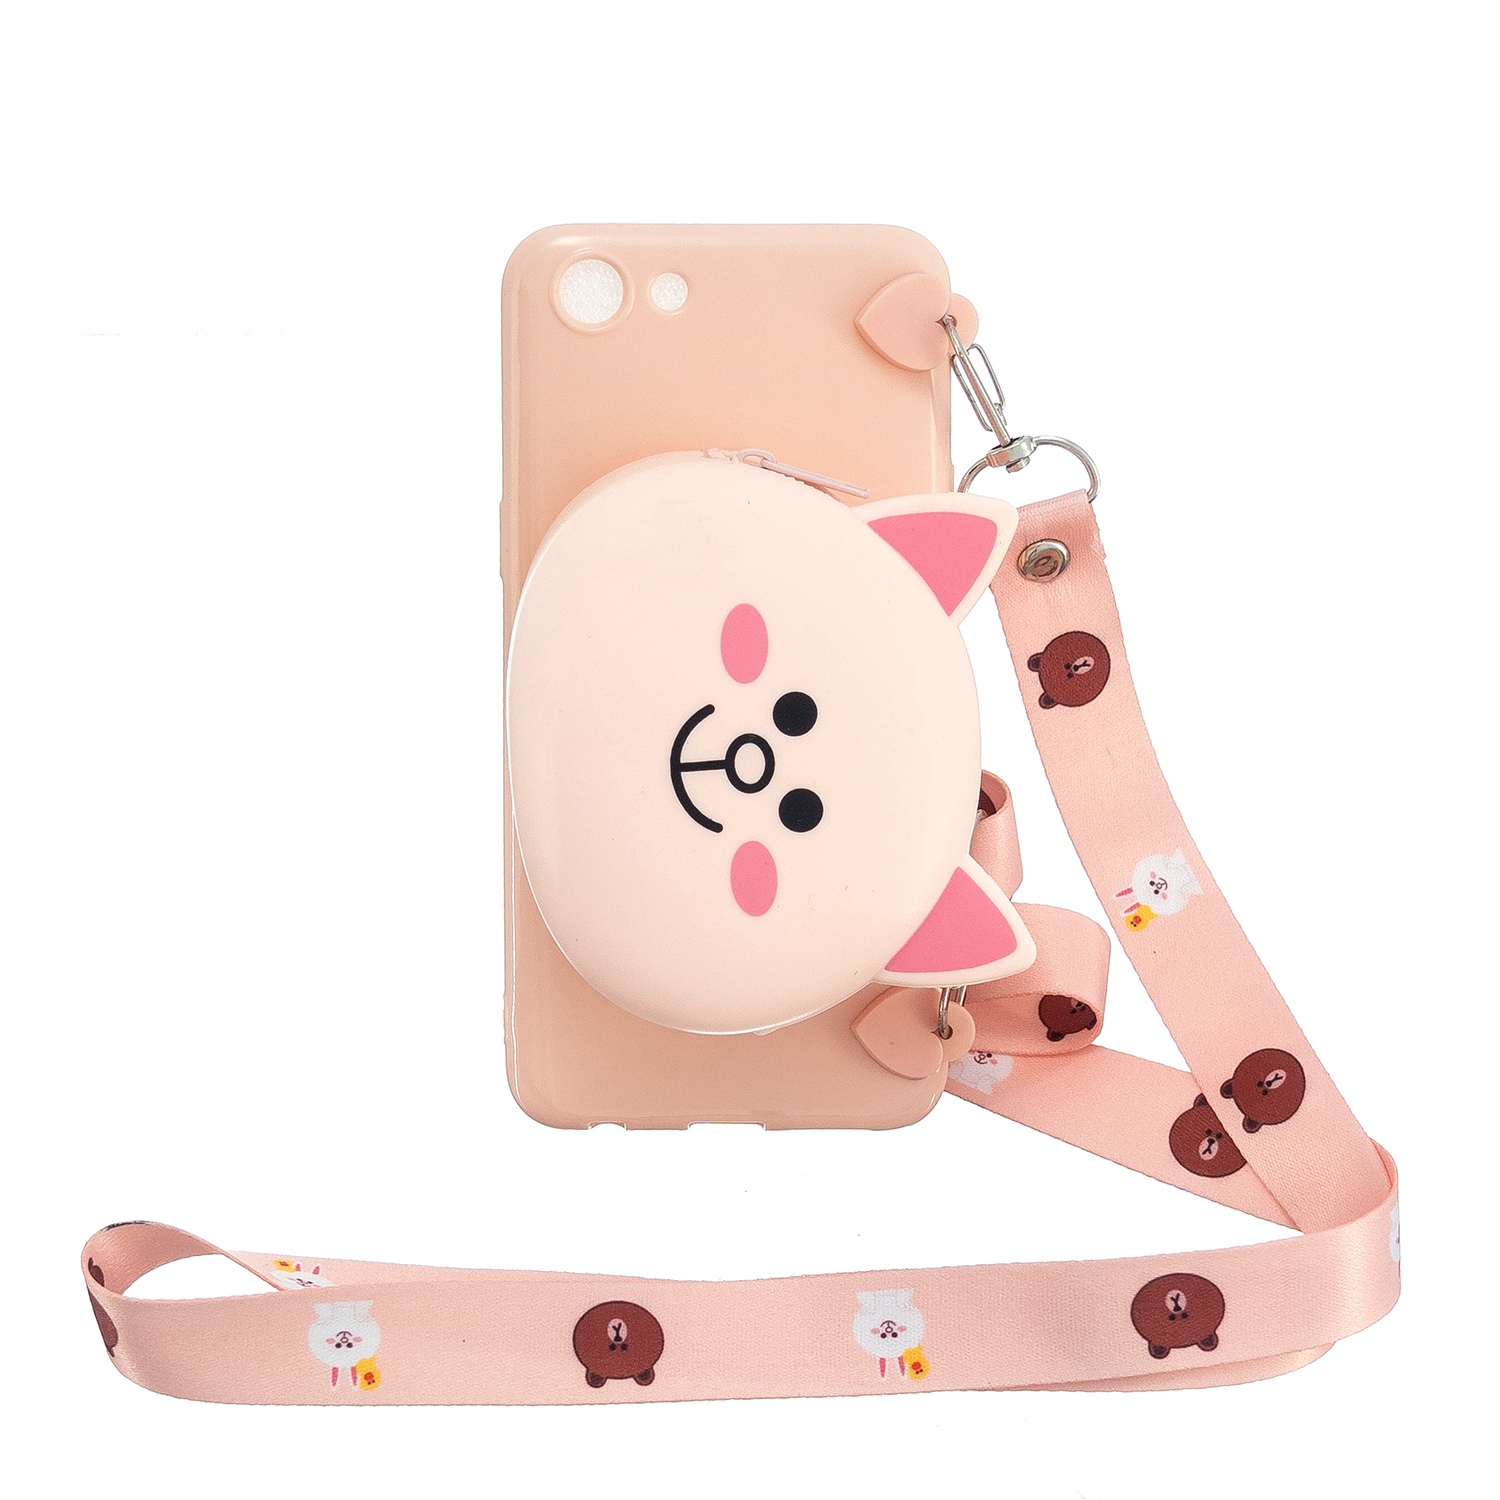 For OPPO A83/A9 2020 Cellphone Case Mobile Phone TPU Shell Shockproof Cover with Cartoon Cat Pig Panda Coin Purse Lovely Shoulder Starp  Pink